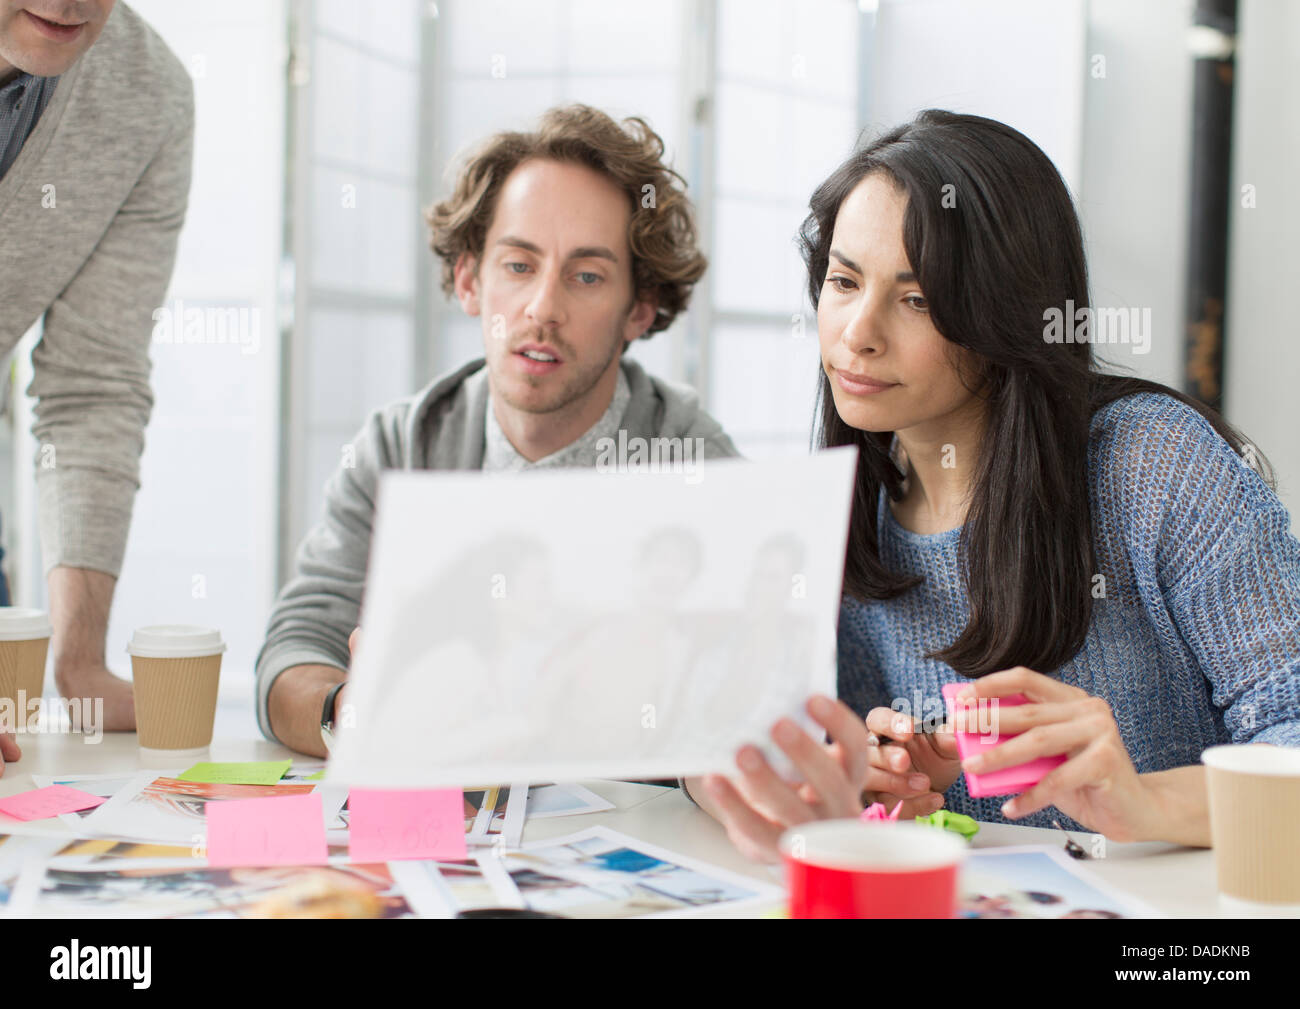 Creative team discussing plans in office meeting Stock Photo